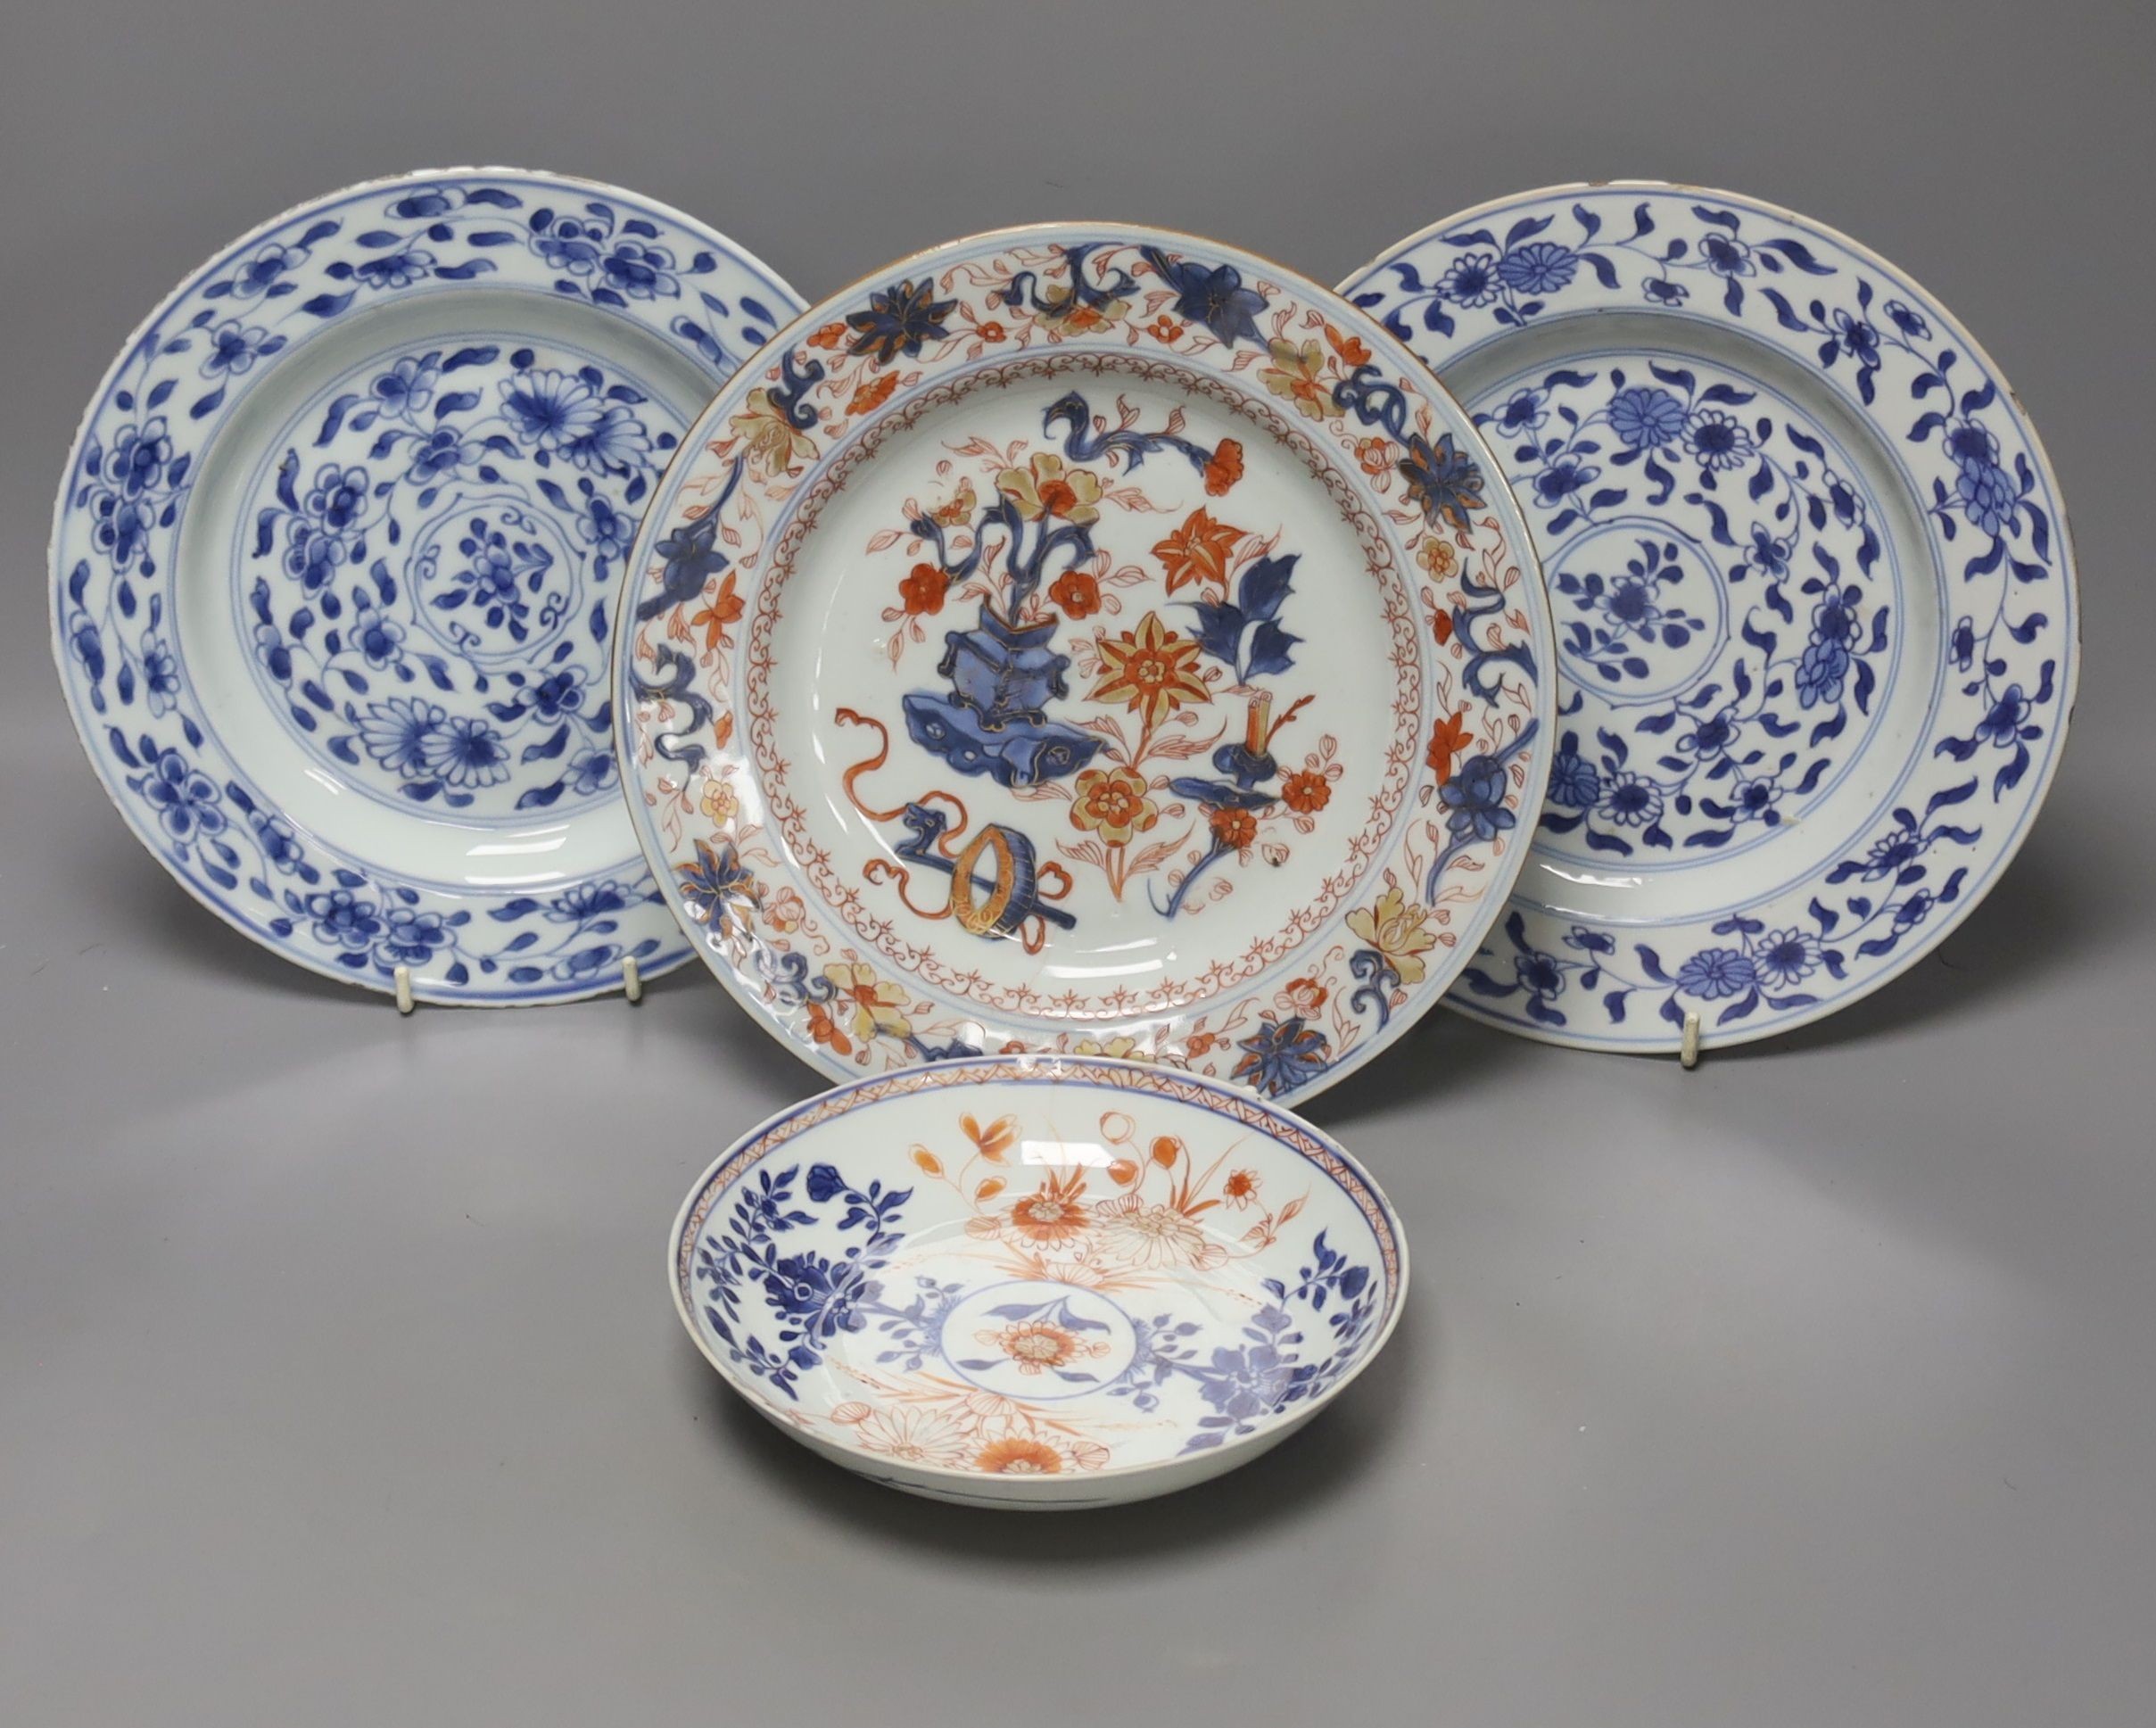 A pair of 18th century Chinese blue and white plates, together with two Chinese Imari dishes, all Kangxi period, largest 23cm